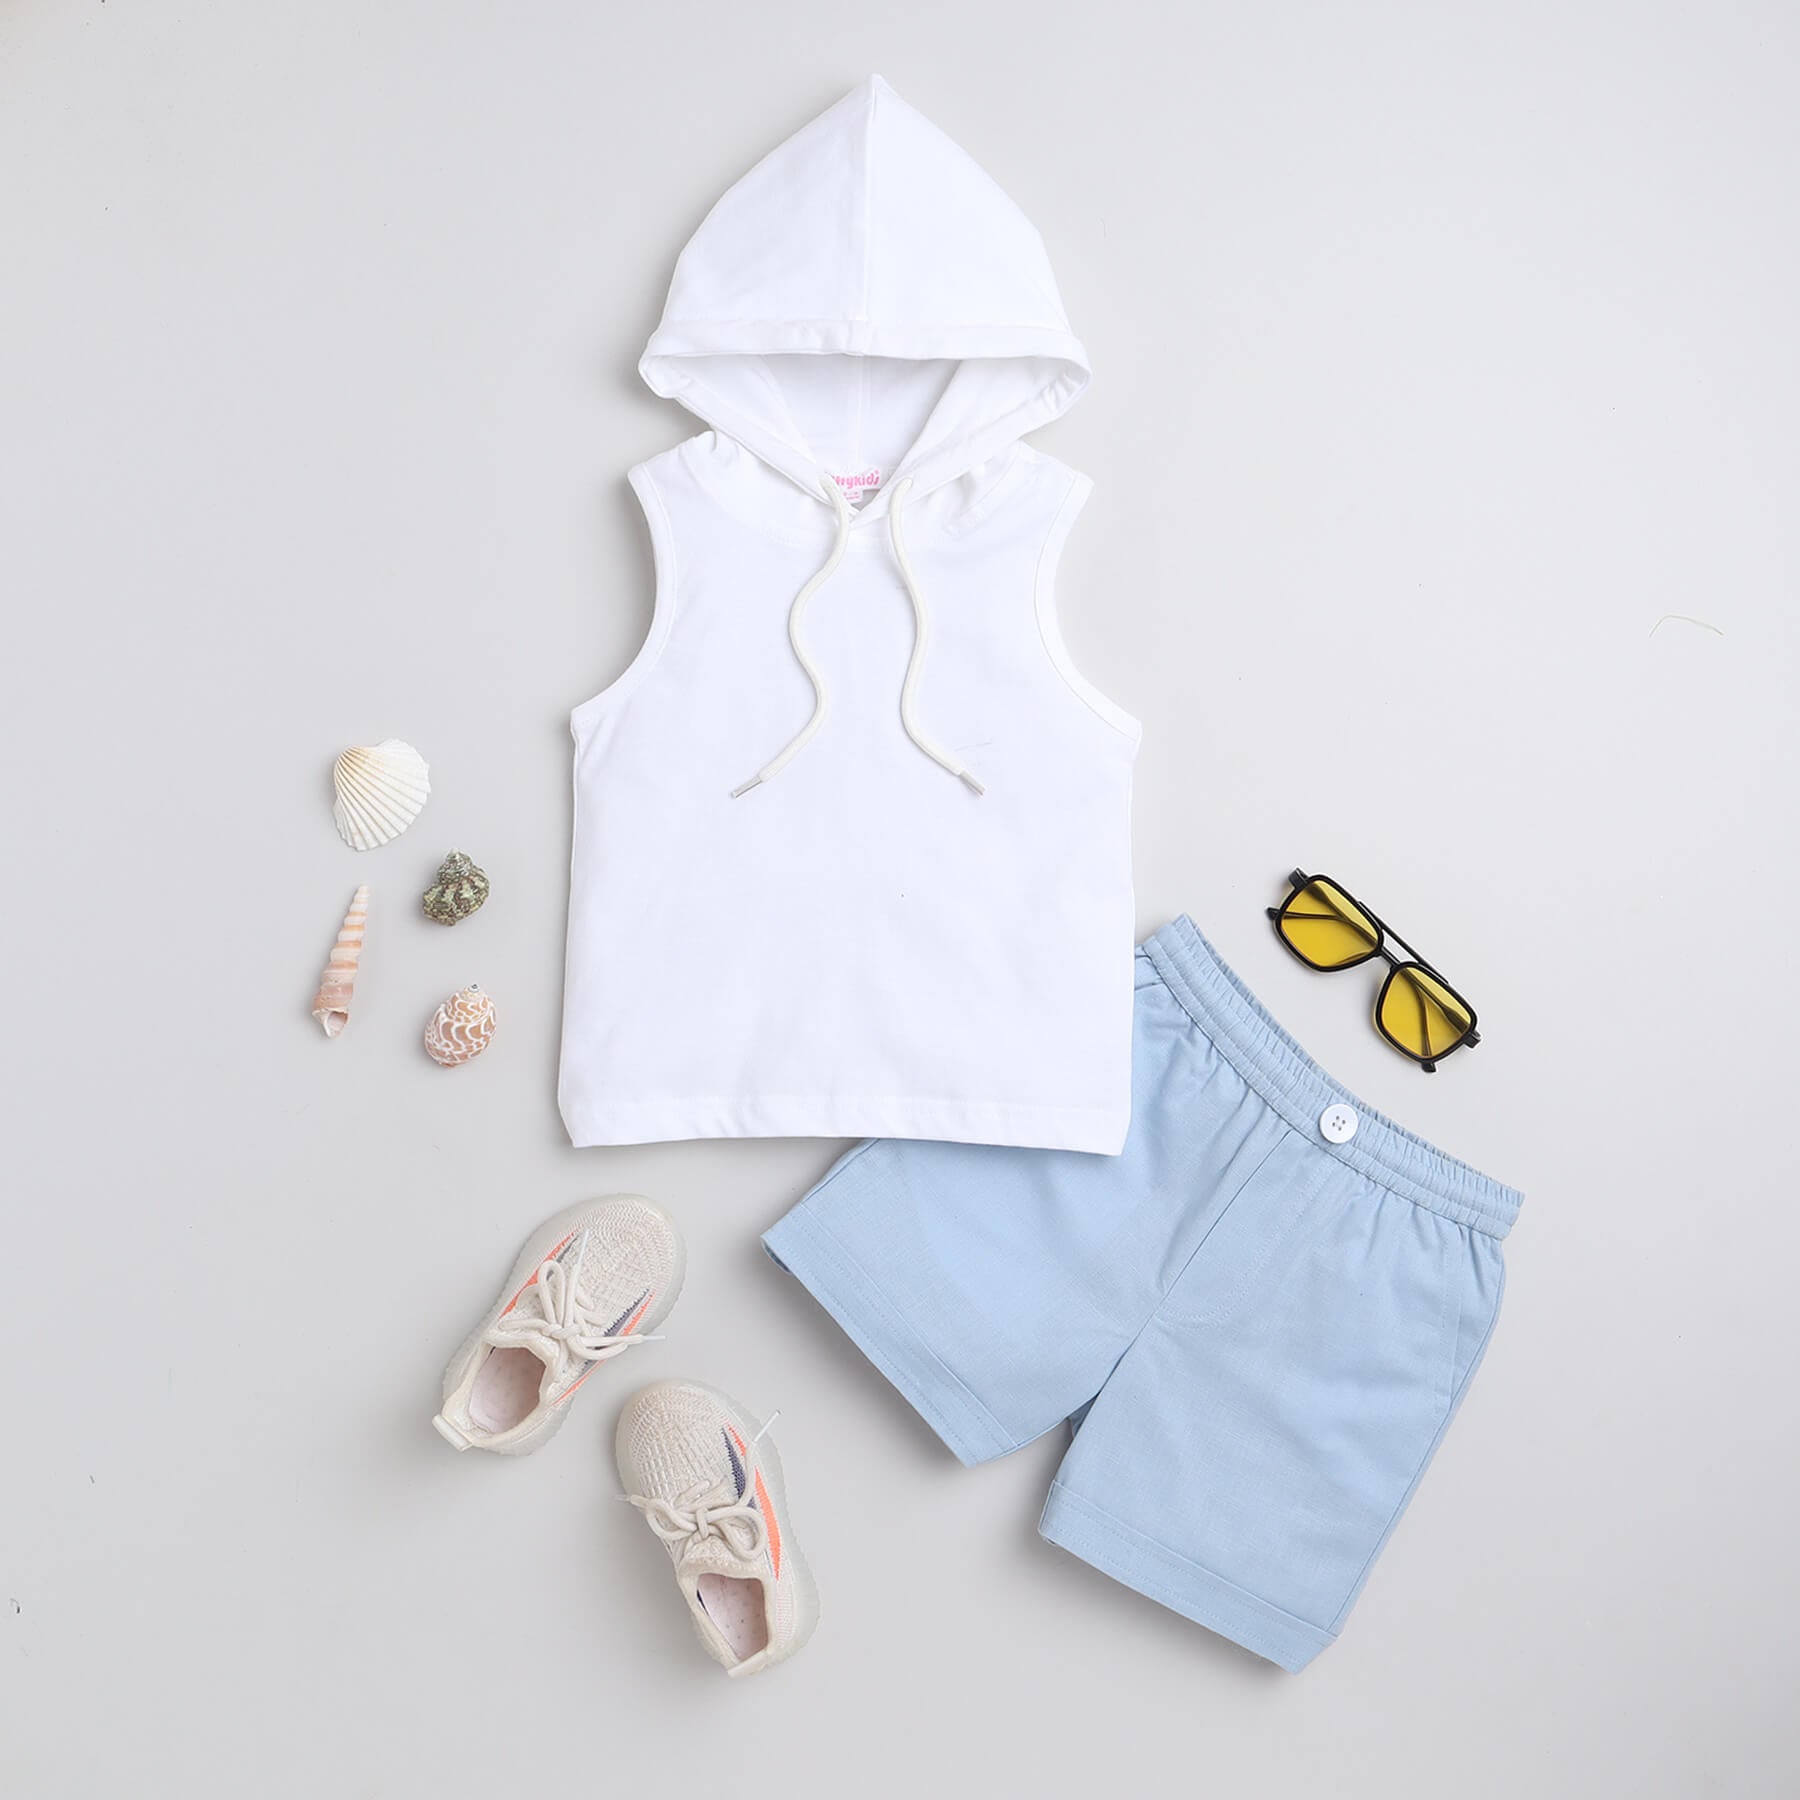 Taffykids solid sleeveless hoodie and shorts set - White/Blue